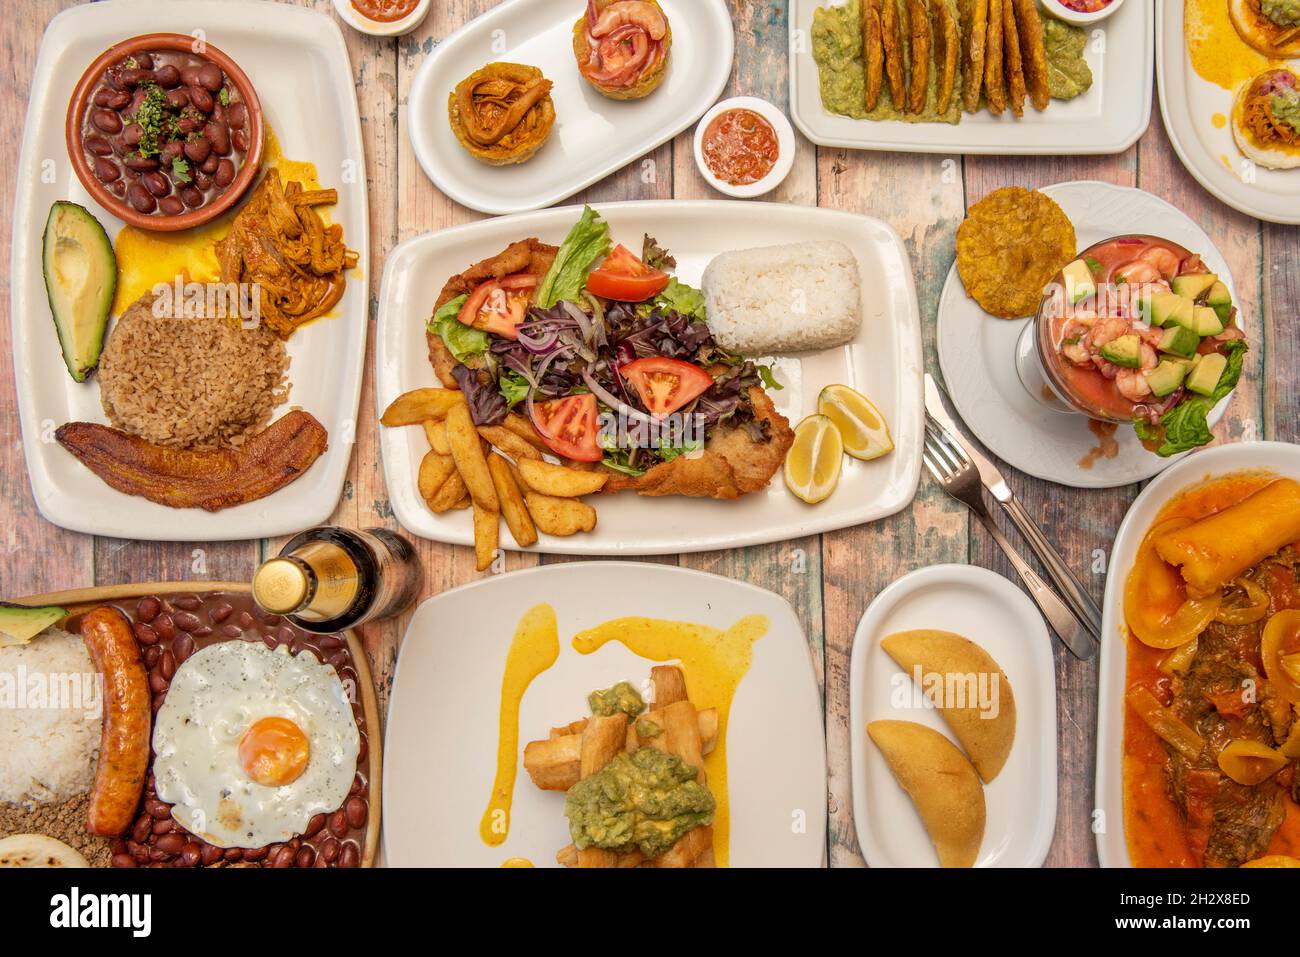 set of delicious Colombian food recipes on wooden table with paisa tray, patacones, chicharrones, fried yucca with guacamole, prawn cocktail and corn Stock Photo